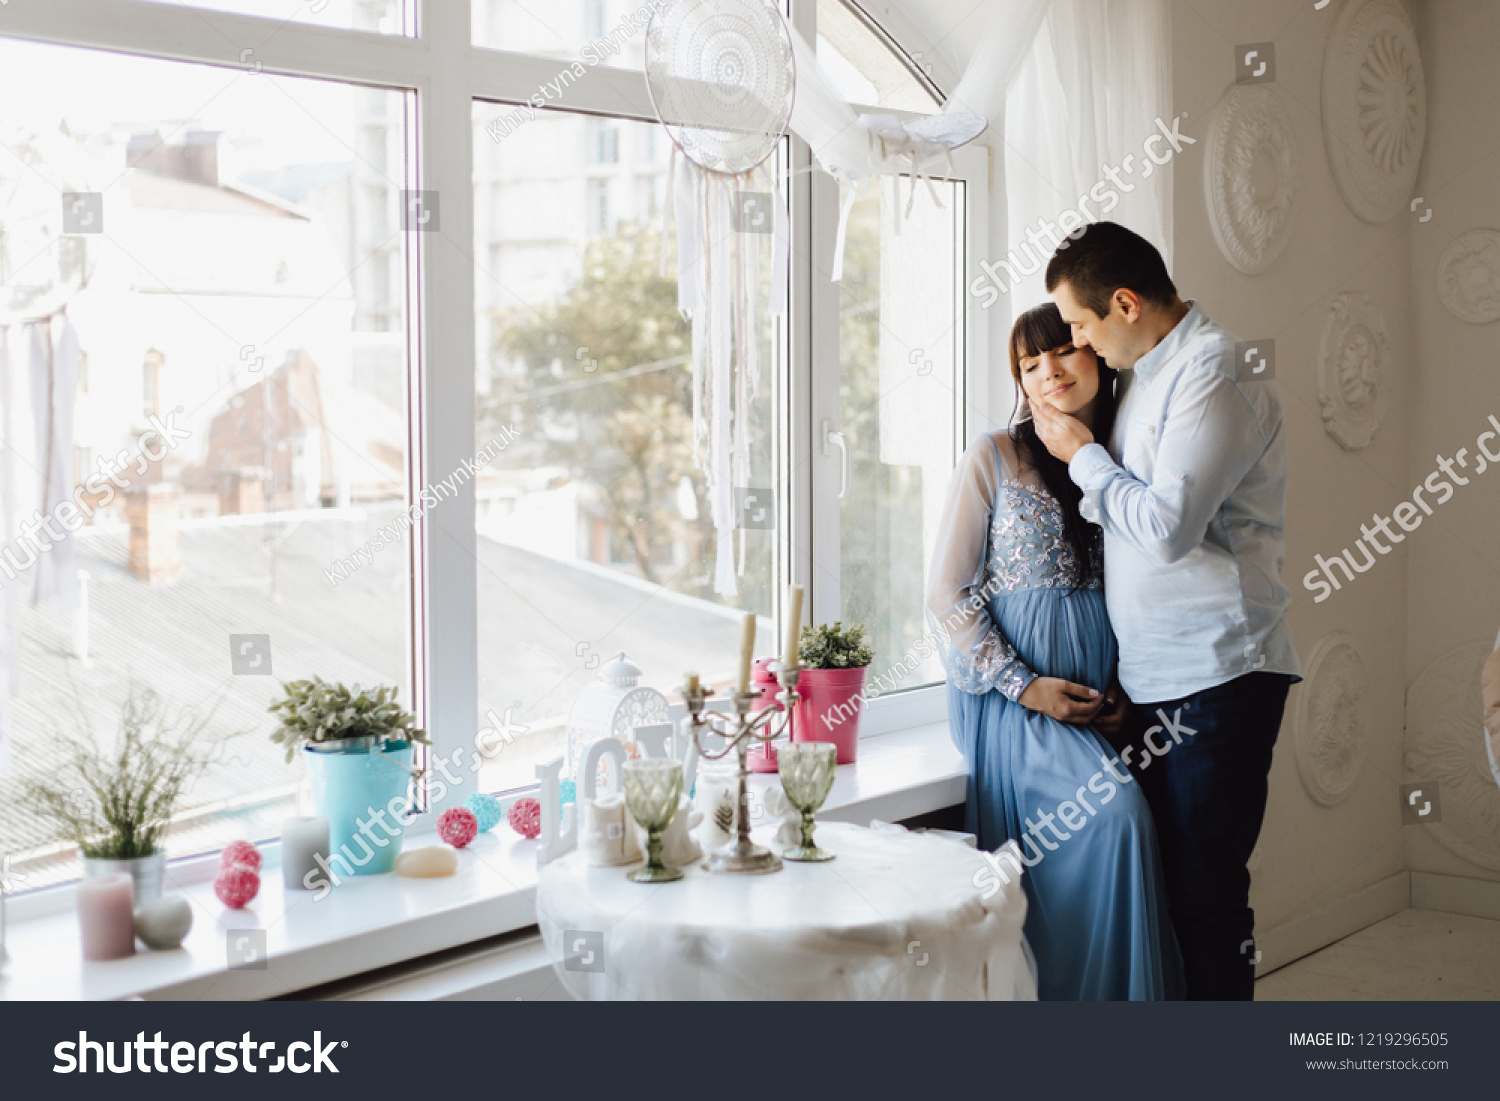 Man holds tender face of a pregnant woman while she sits on a windowsill before bright window #1219296505